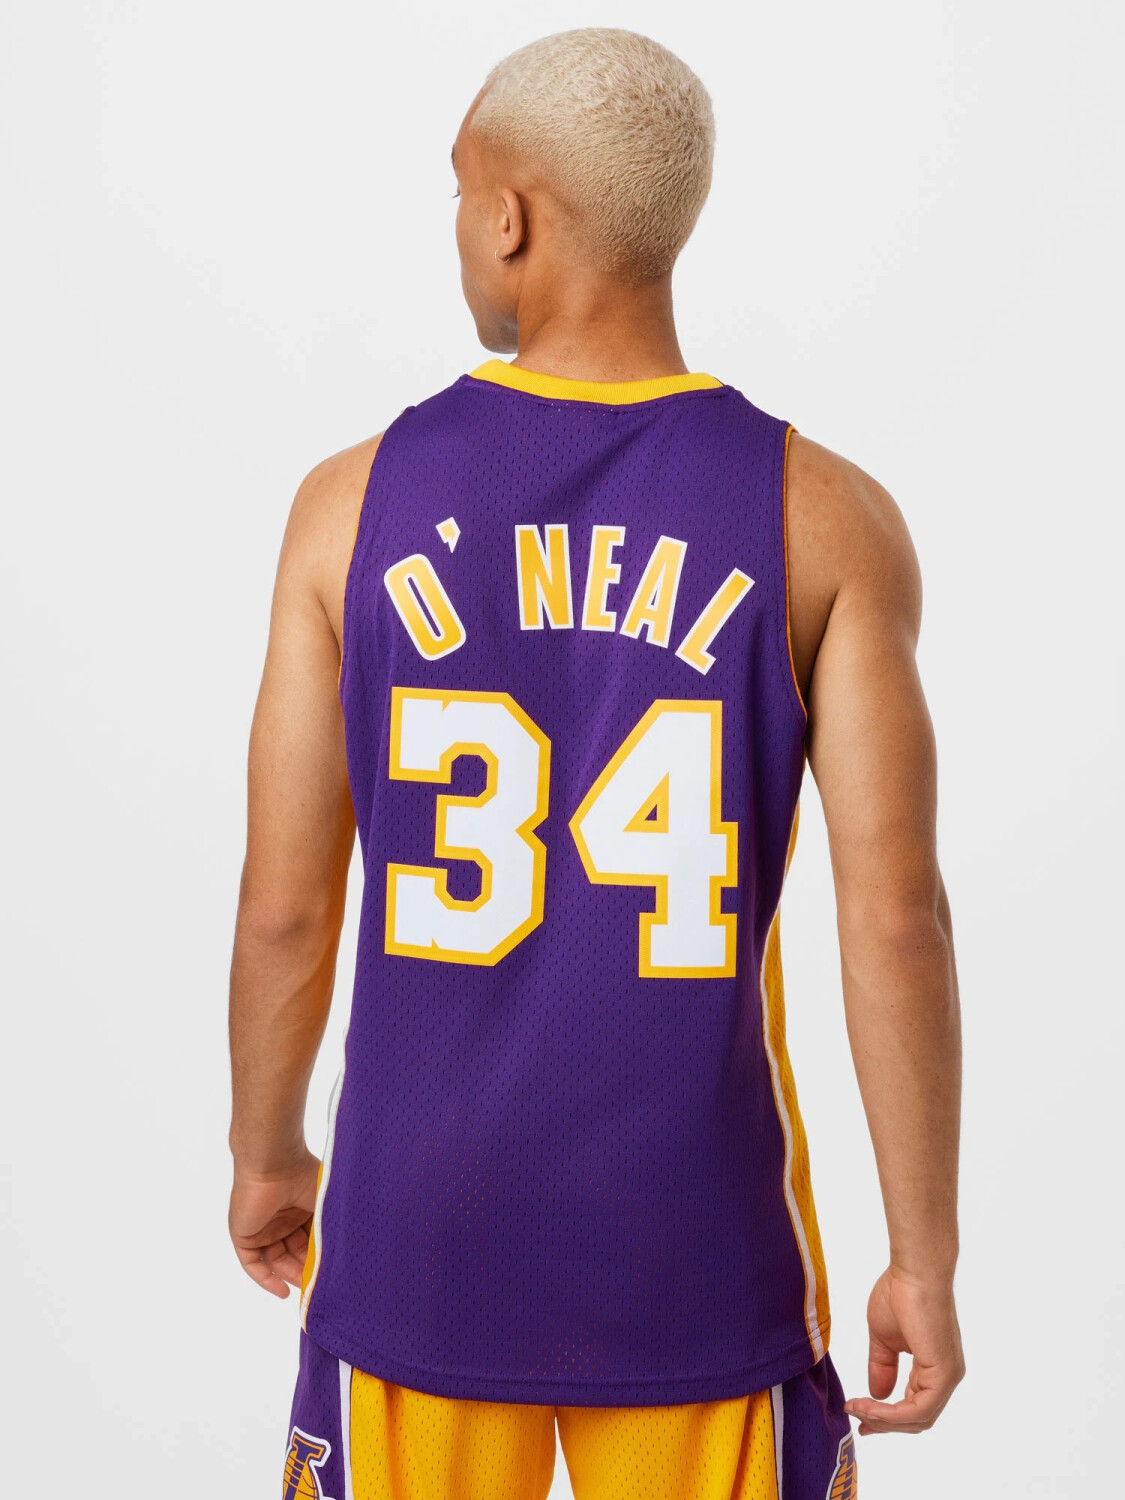 Mitchell & Ness Los Angeles Lakers - Shaquille O'Neal 2.0 1999-00